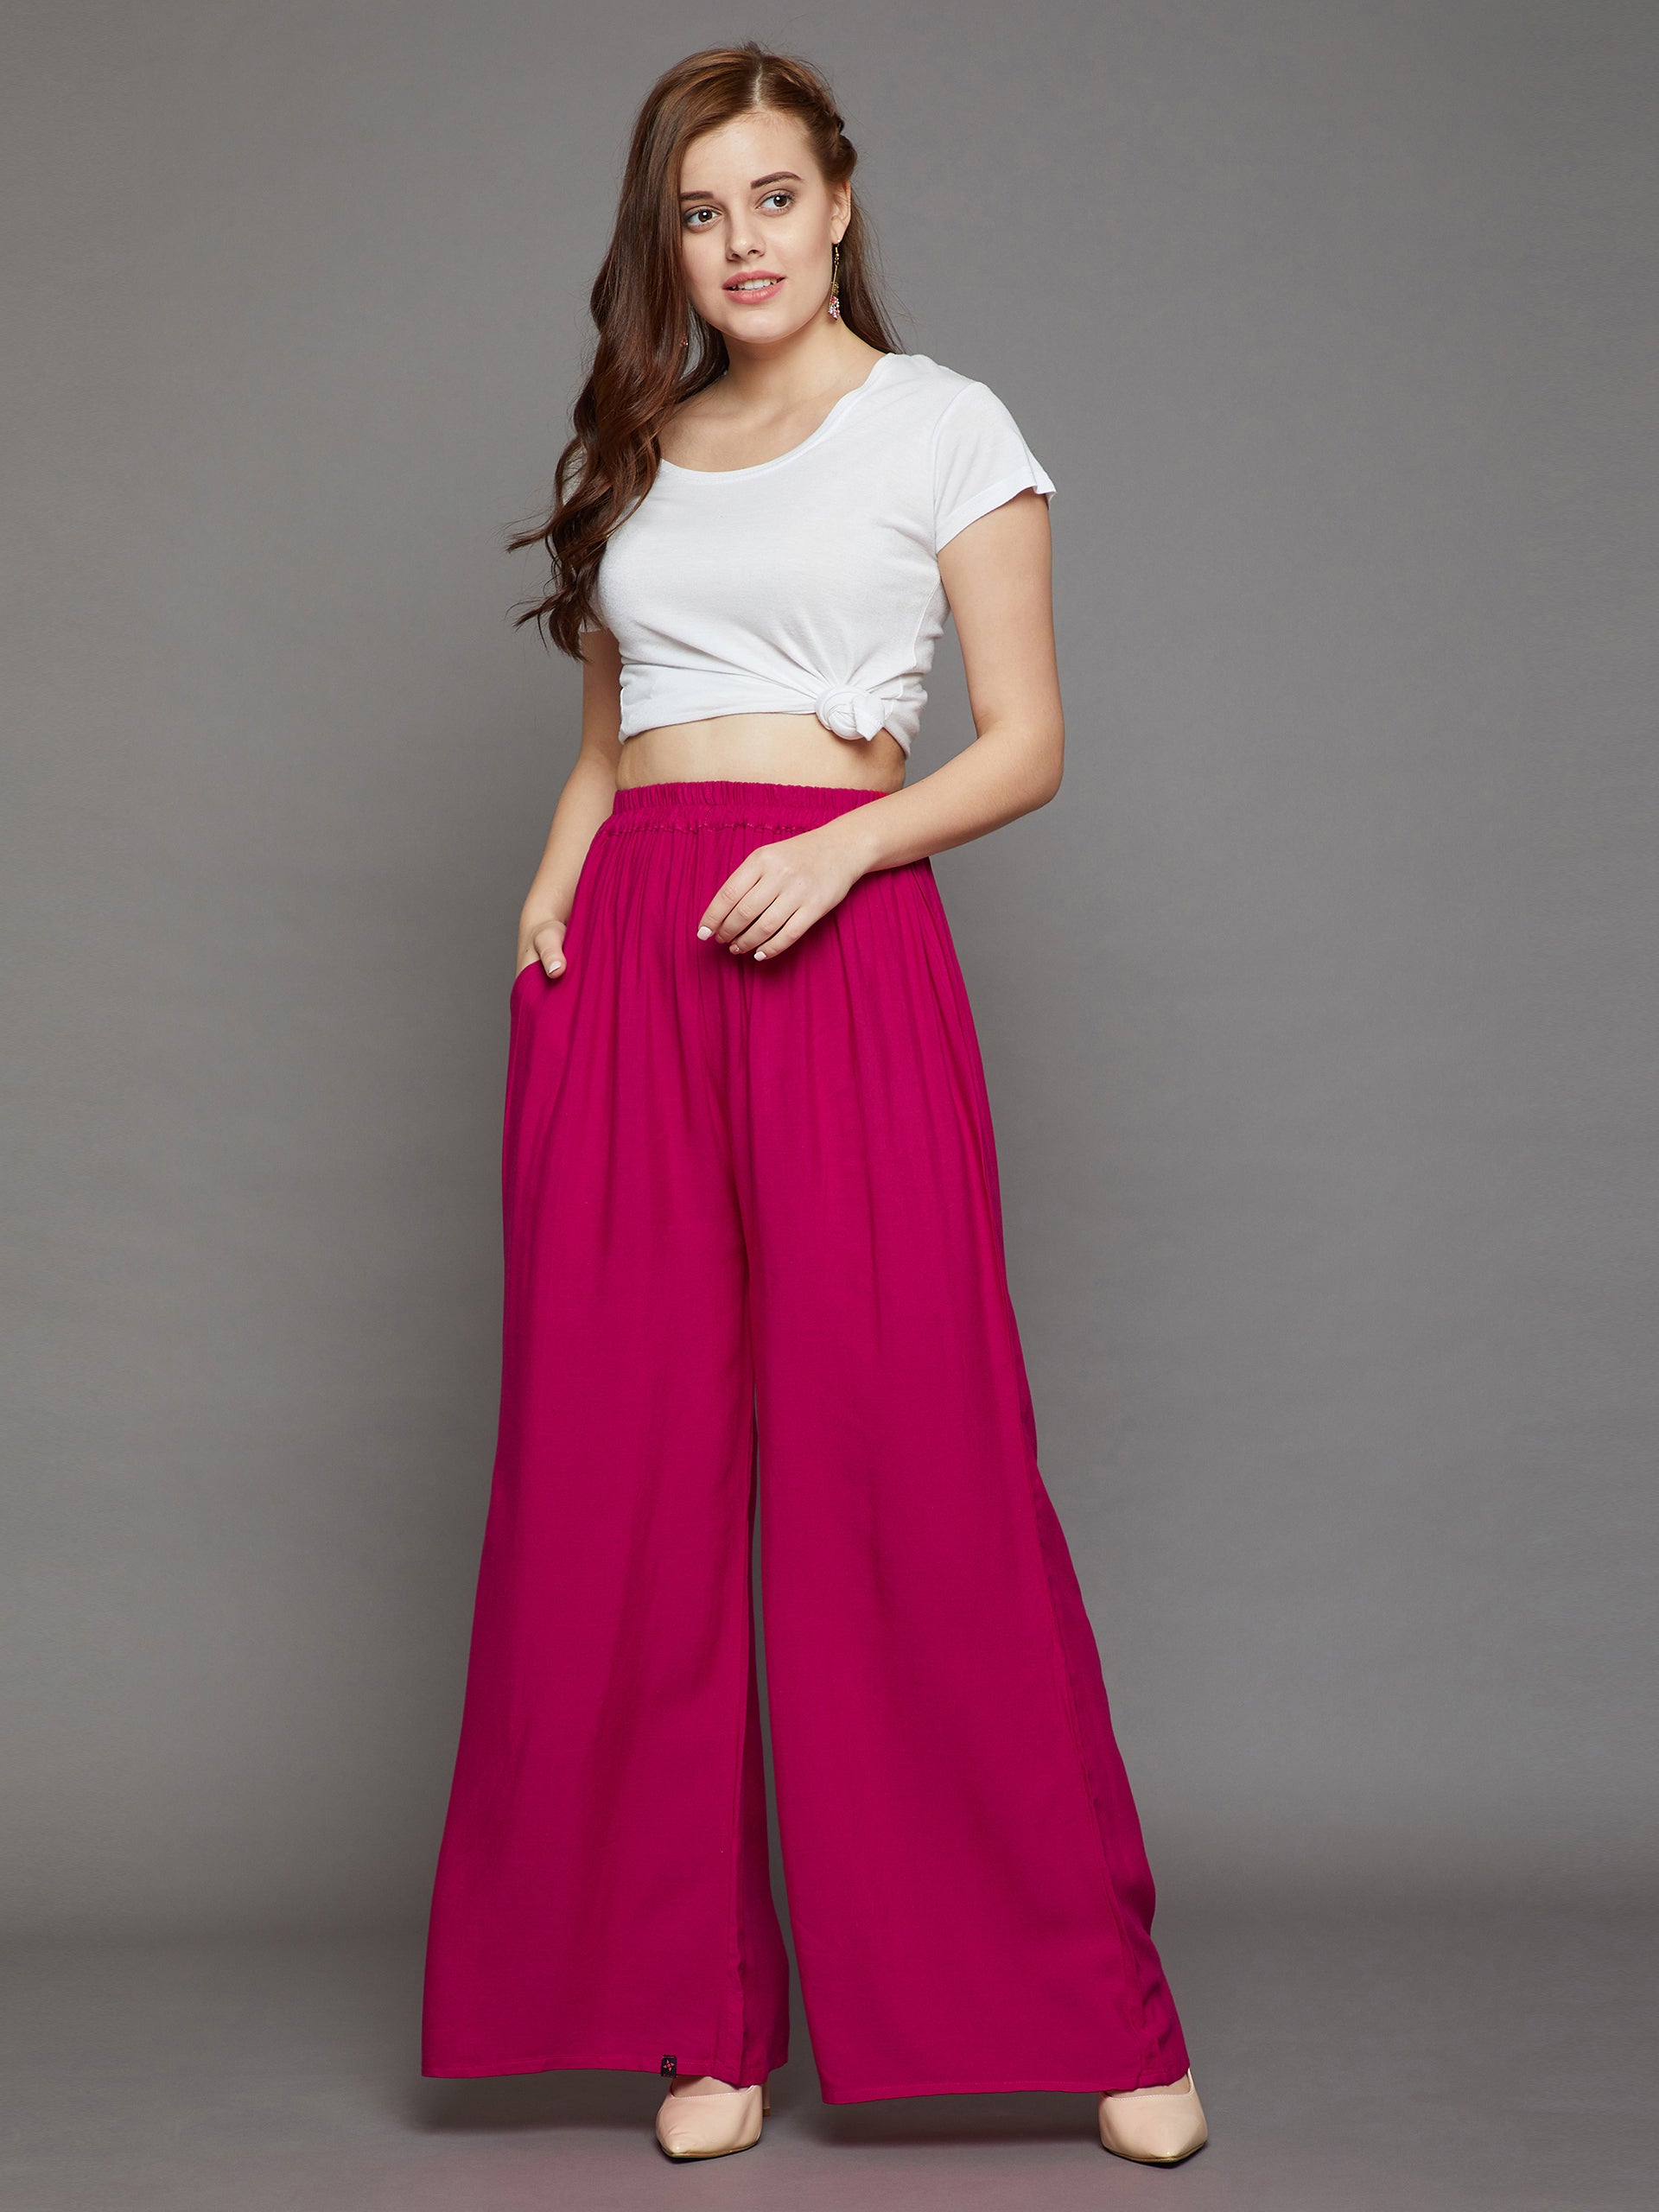 Buy White Peach and Gray Stripe Palazzo Pant Cotton for Best Price,  Reviews, Free Shipping